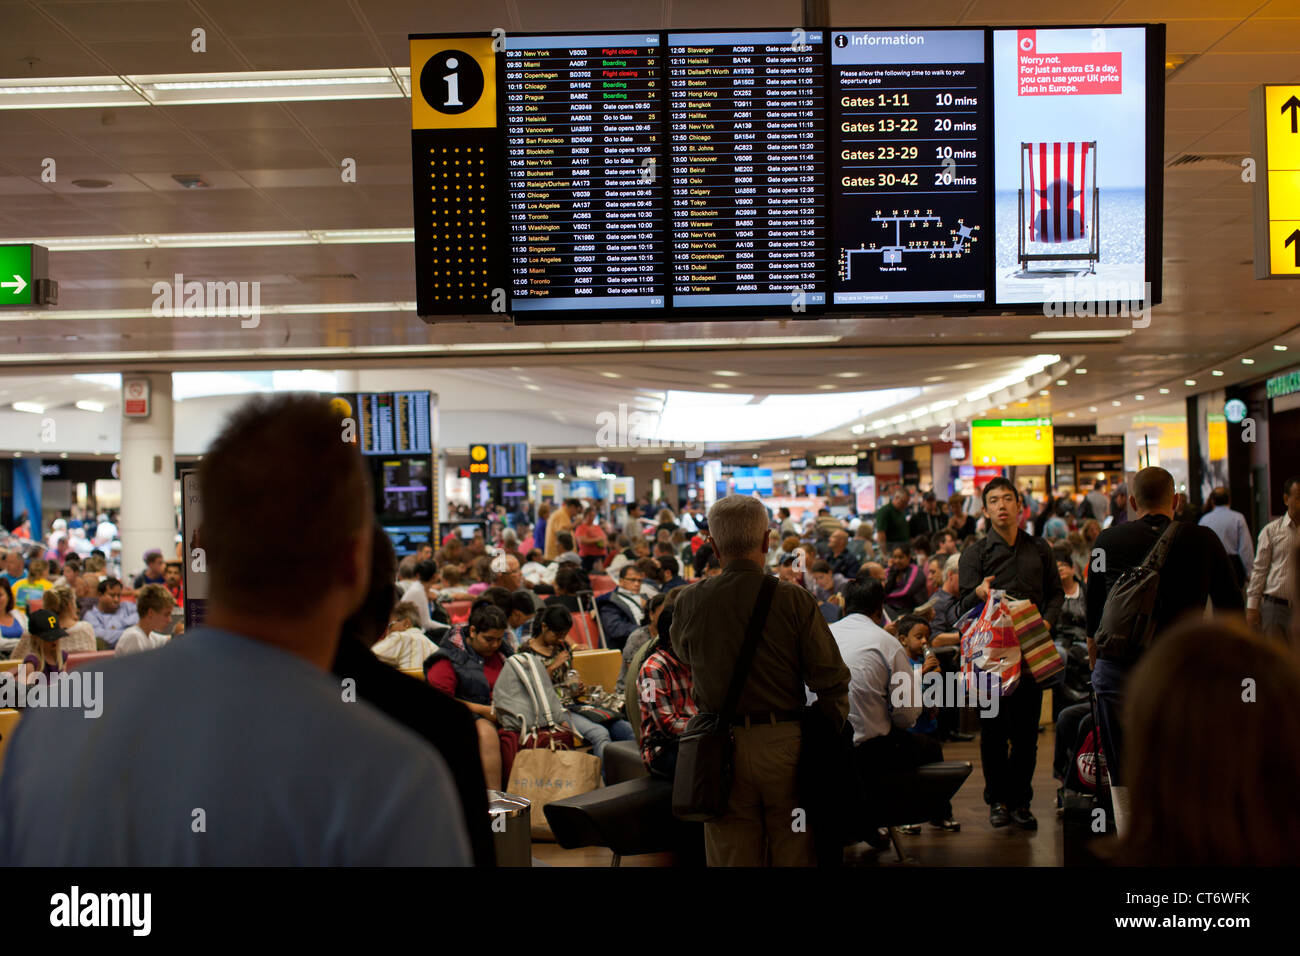 Airline passengers look for their flight departures on an electronic board at London, England's Heathrow Airport in Terminal 3. Stock Photo